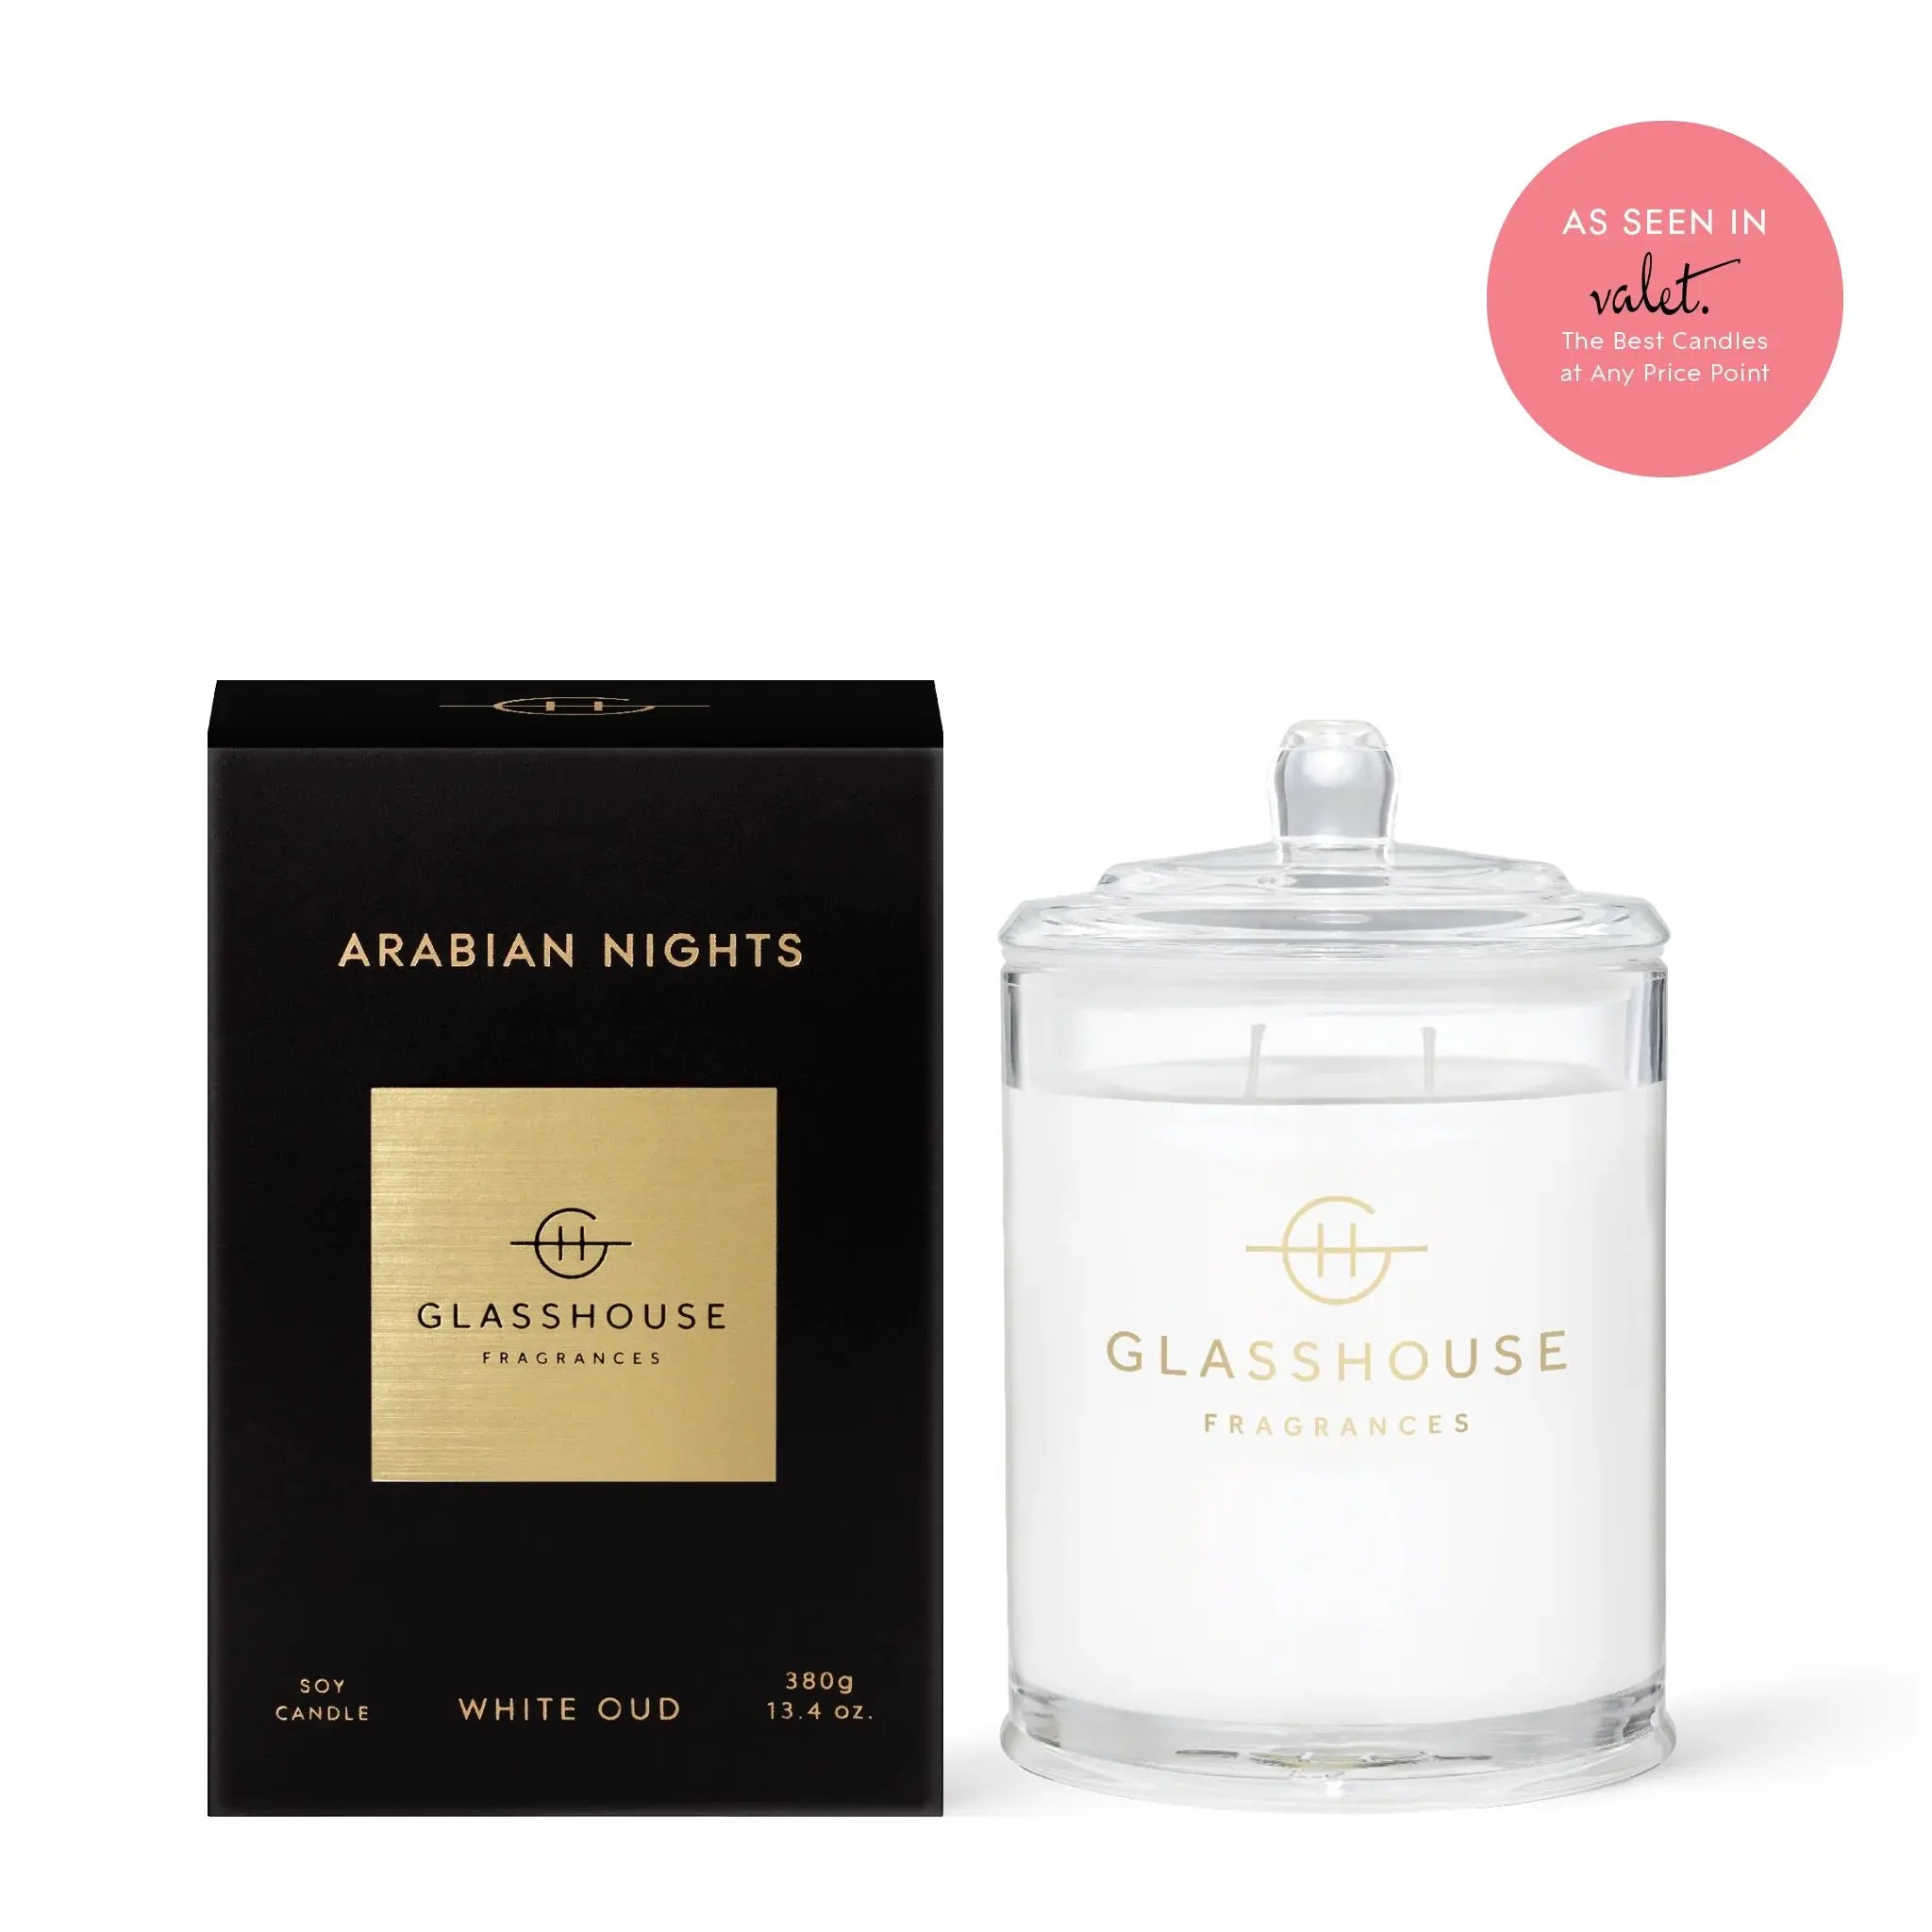 Glasshouse Fragrances Arabian Nights Soy Candle White Oud 380 grams 13.4 ounces As seen in valet. The best candles at any price point.